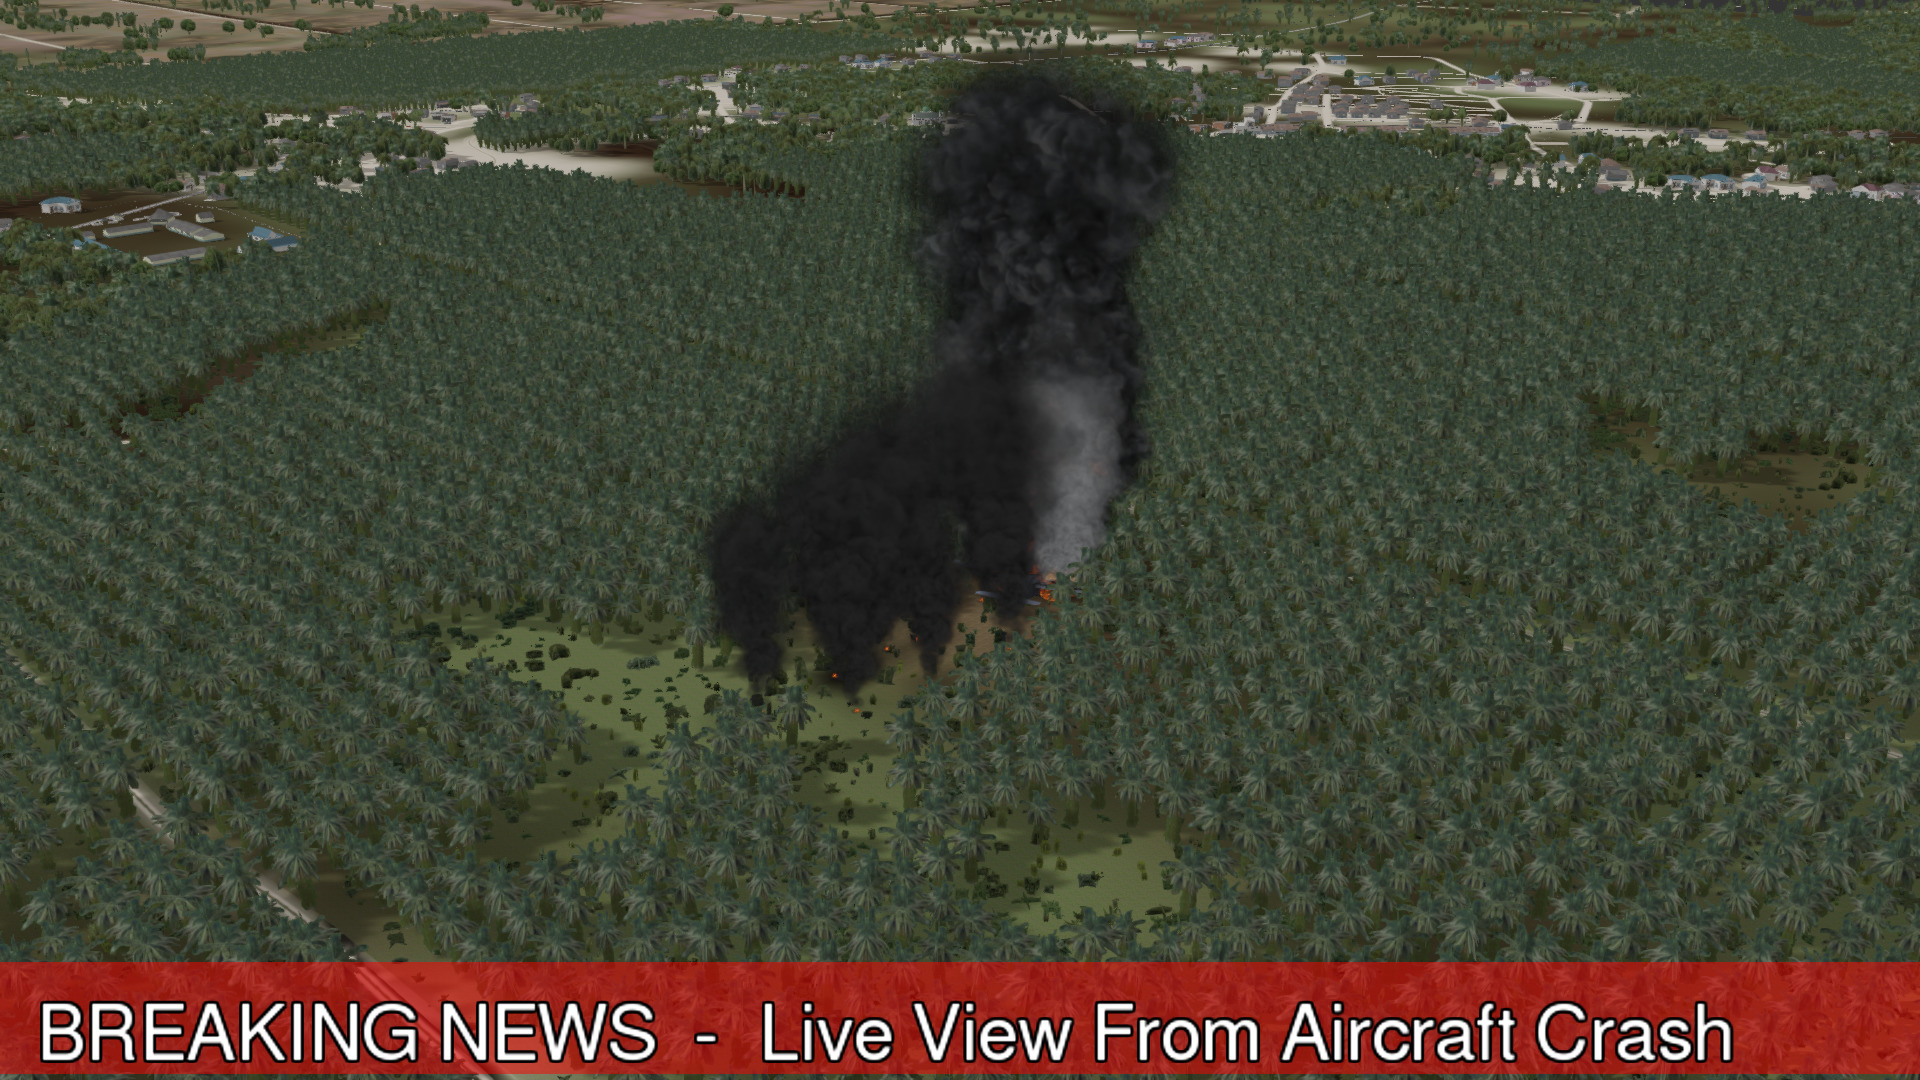 News coverage of aircraft crash in the forest surrounded by fire during a command training exercise using ADMS. 